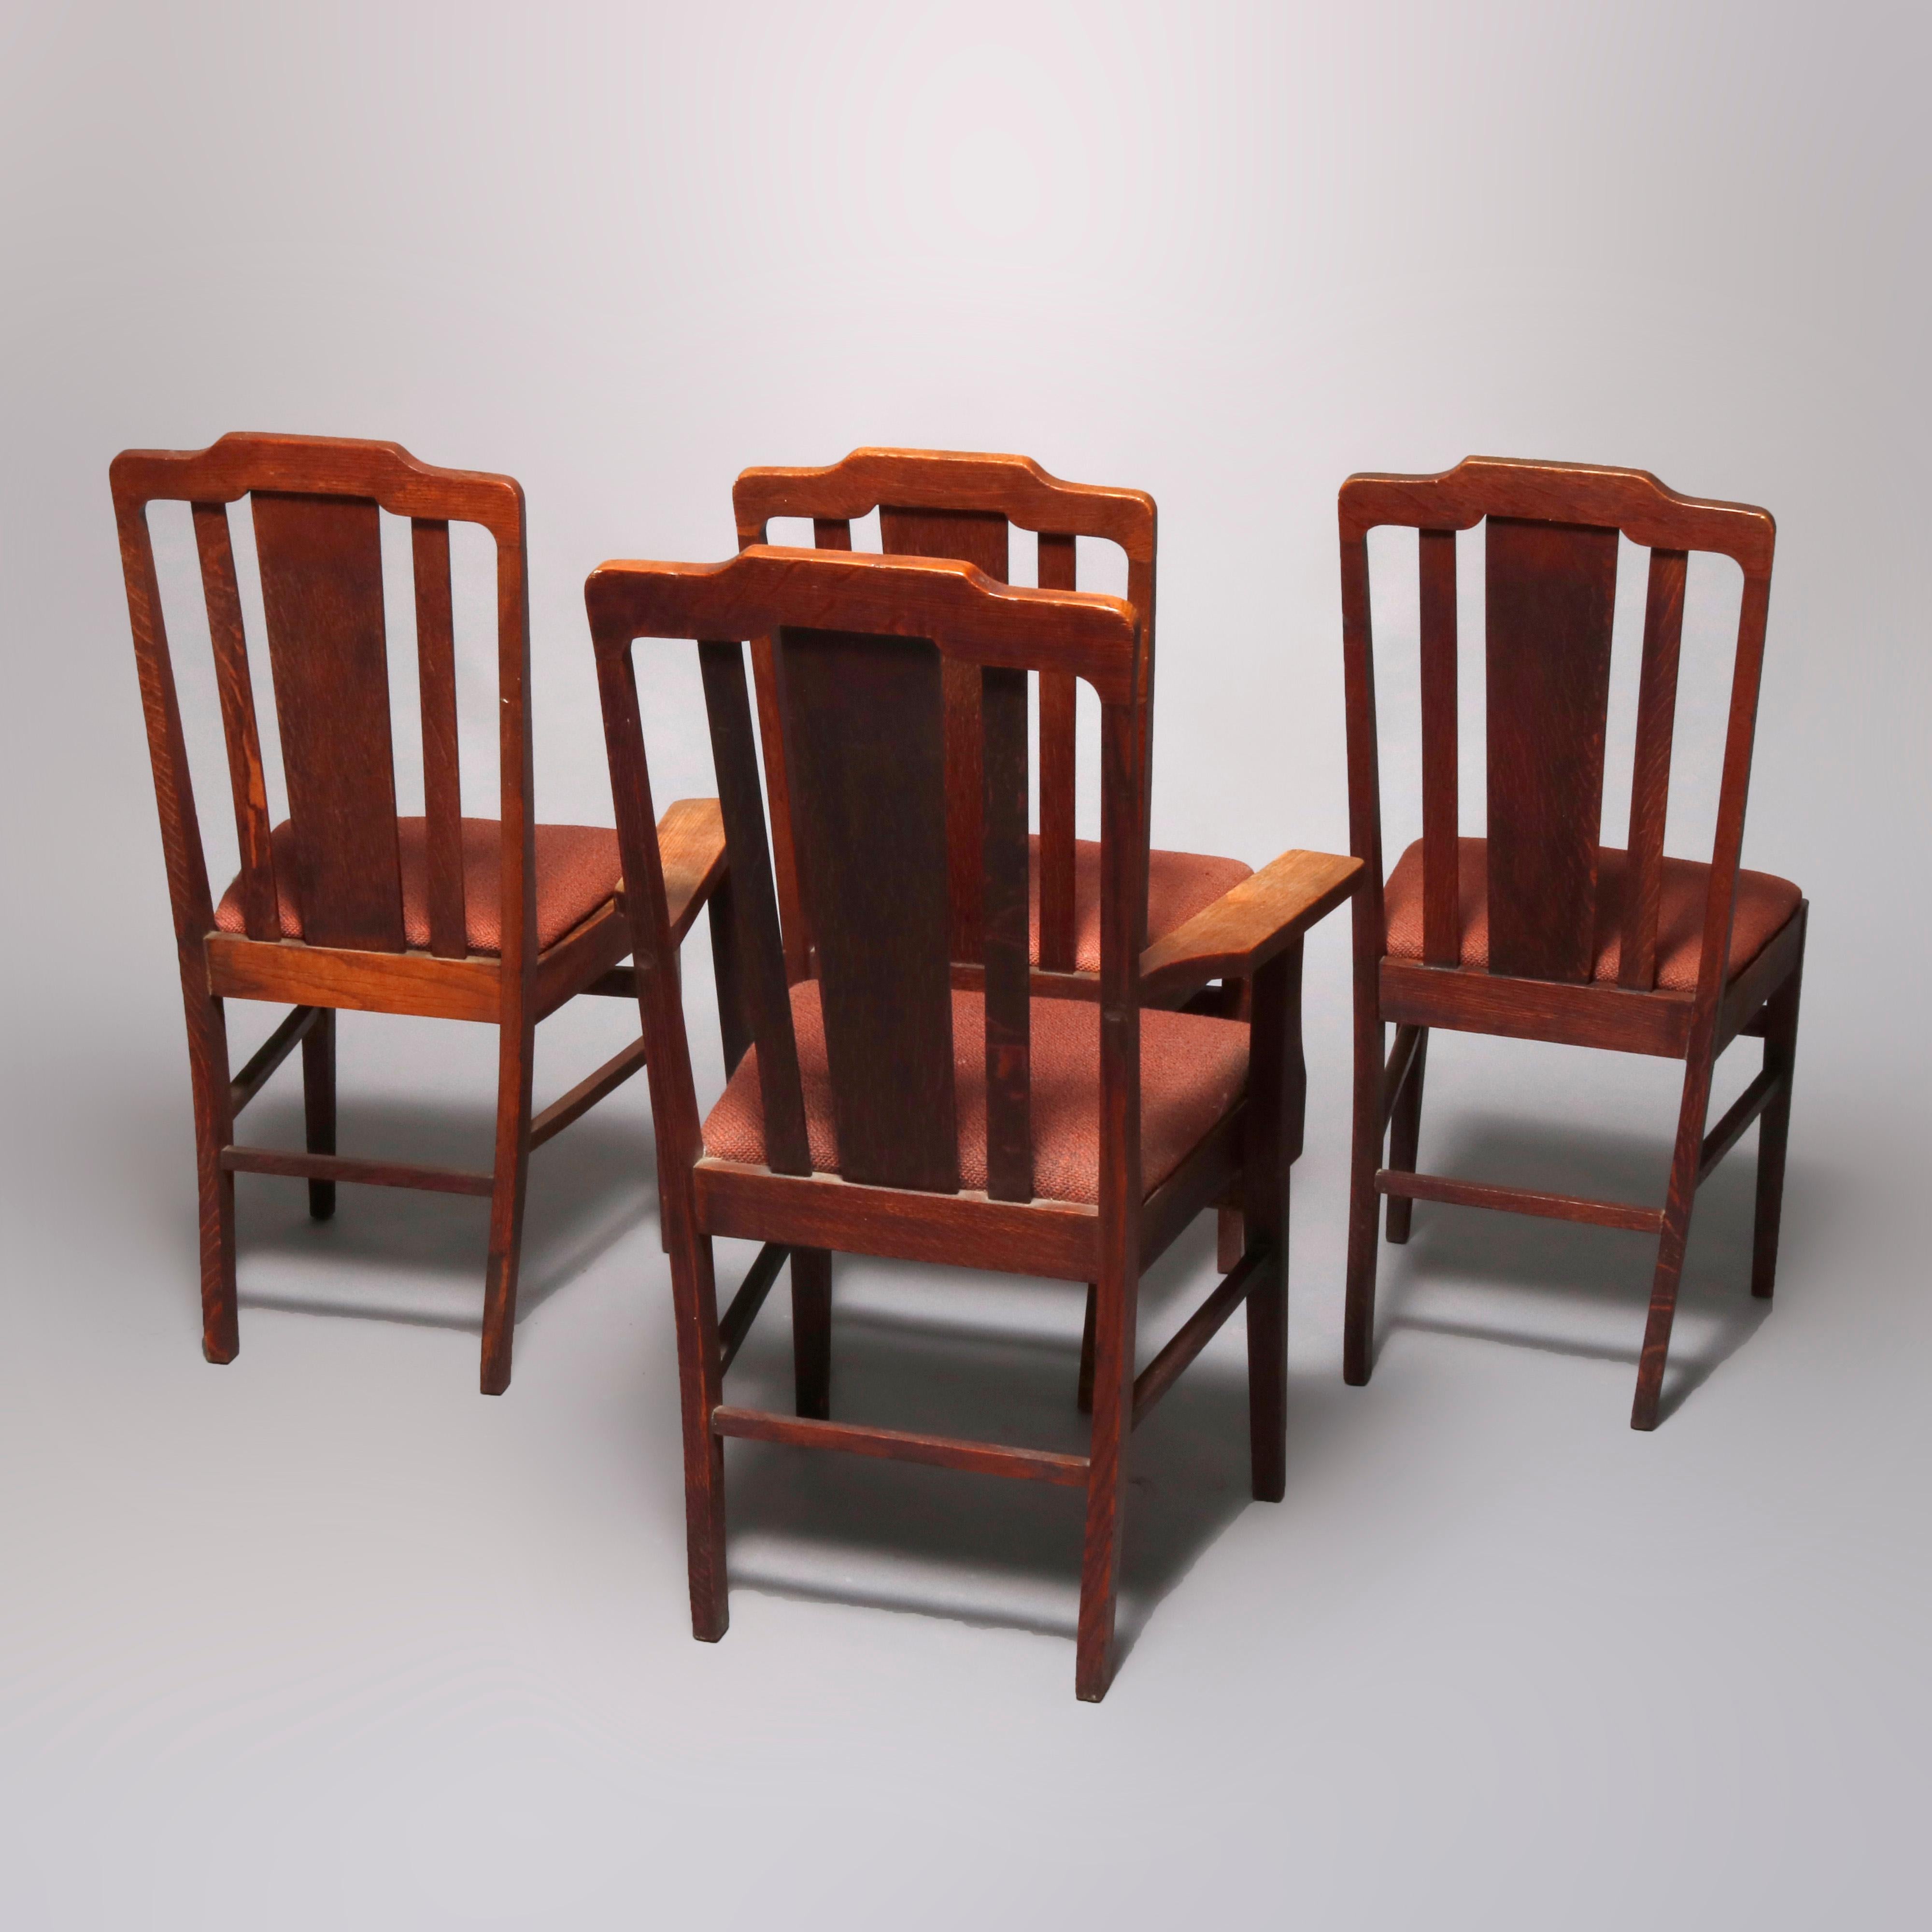 American Four Antique Arts & Crafts Mission Oak Stickley School Dining Chairs, circa 1910